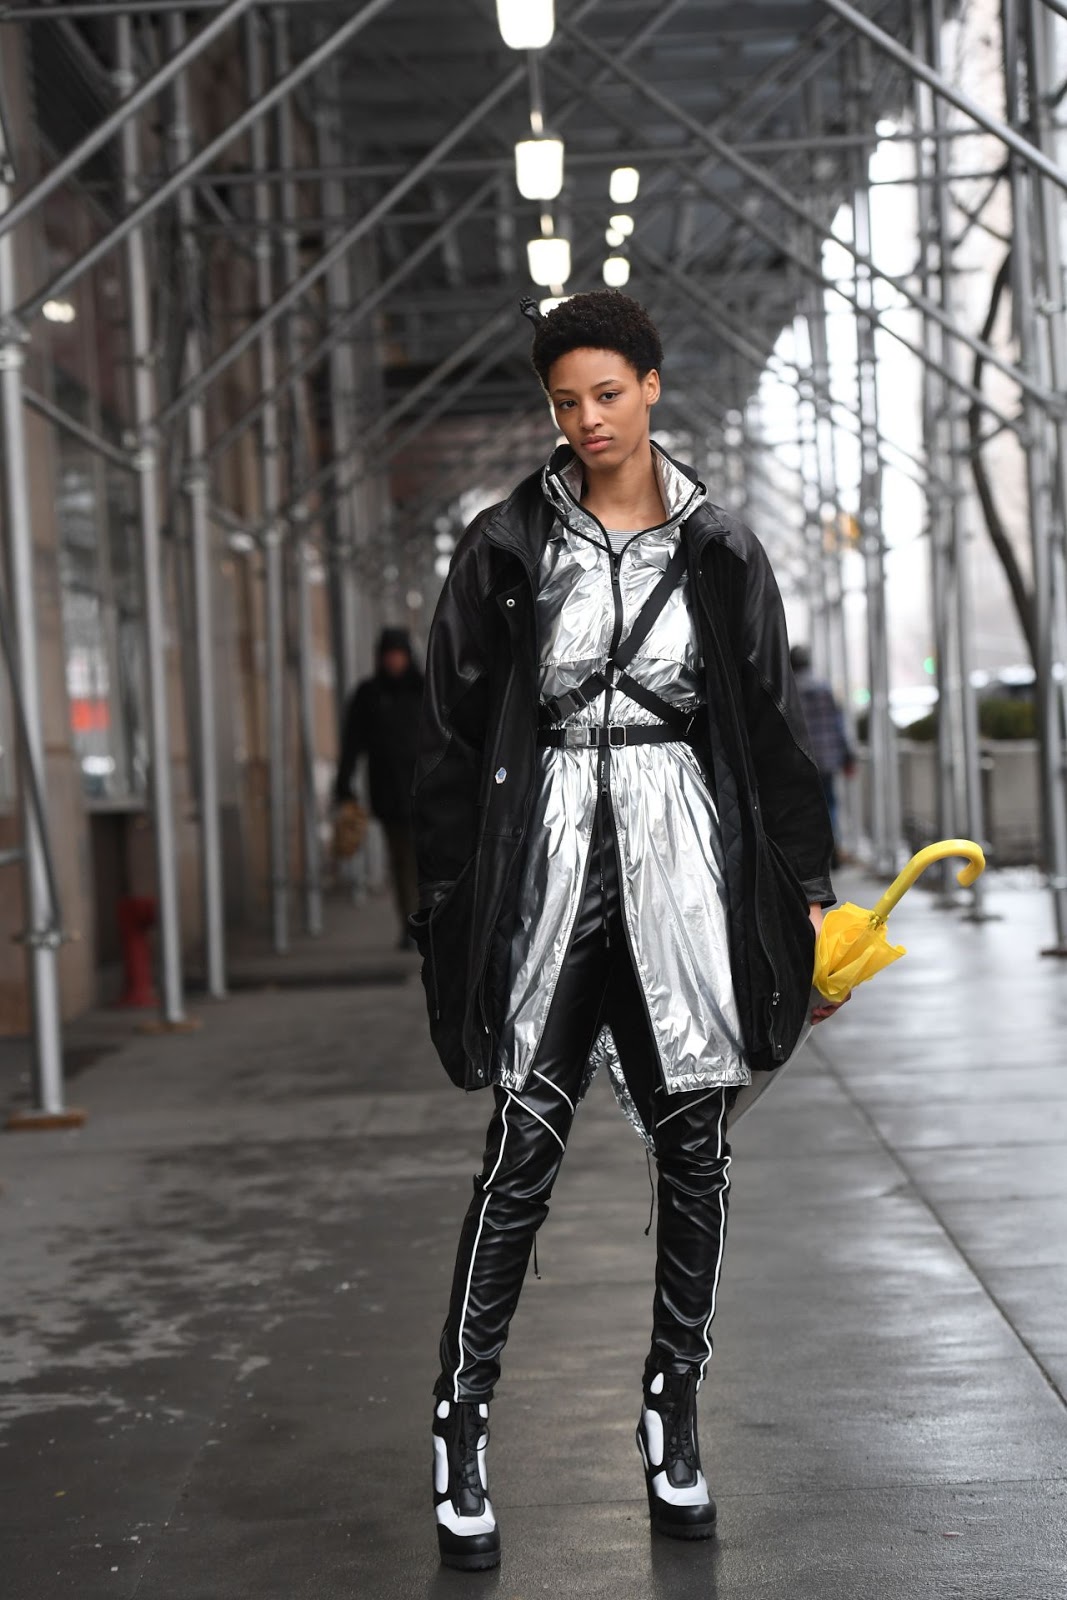 Add These Chic Metallic Pieces to Your Wardrobe